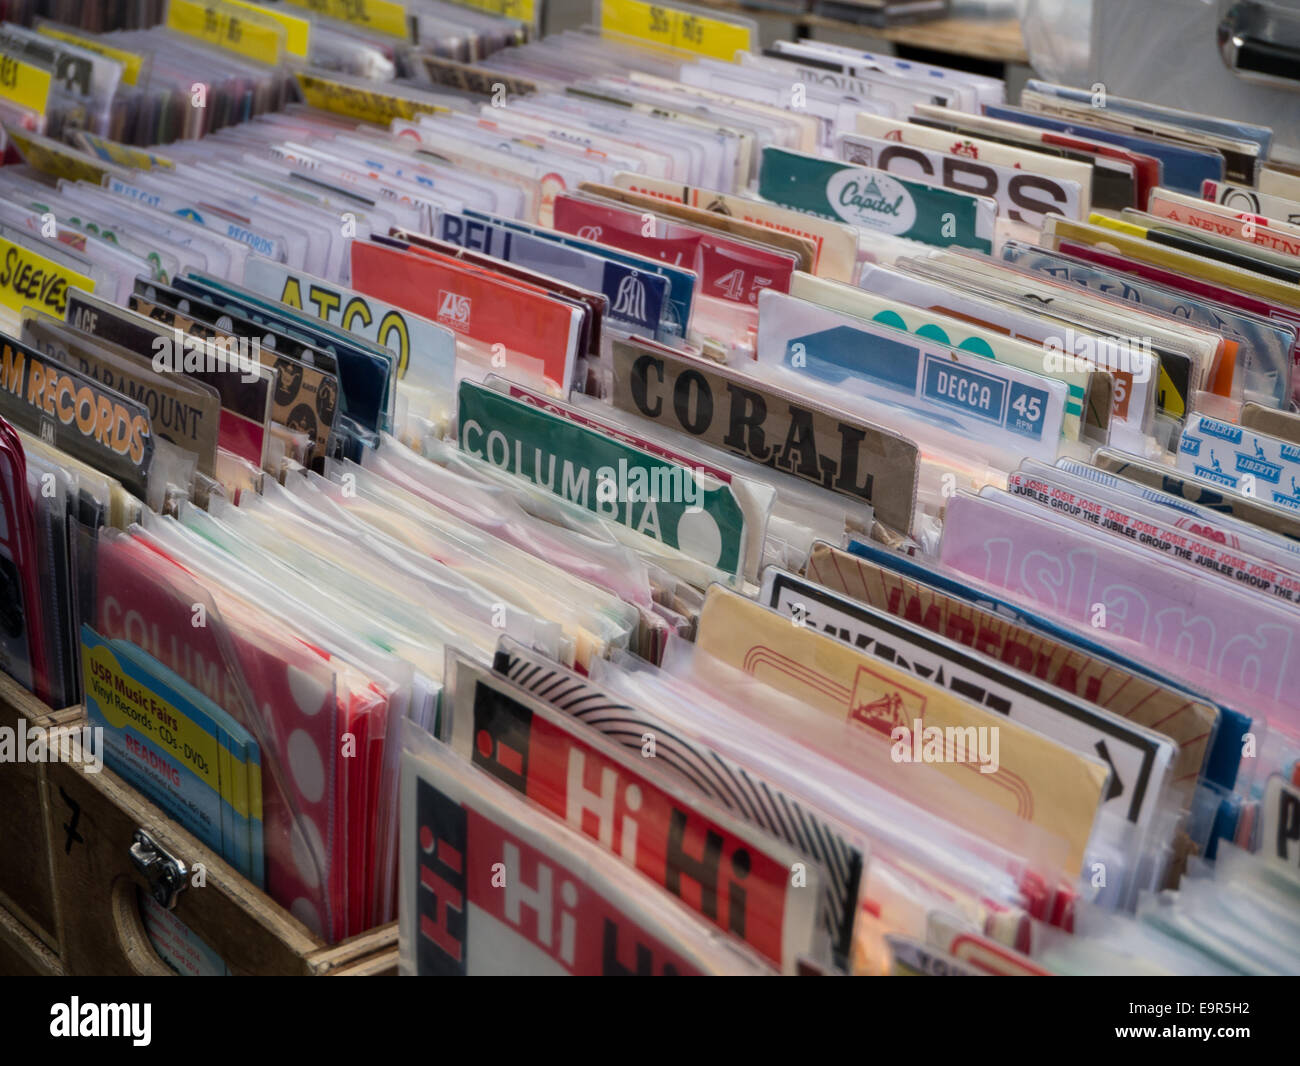 Vinyl records on sale at a market stall Stock Photo - Alamy